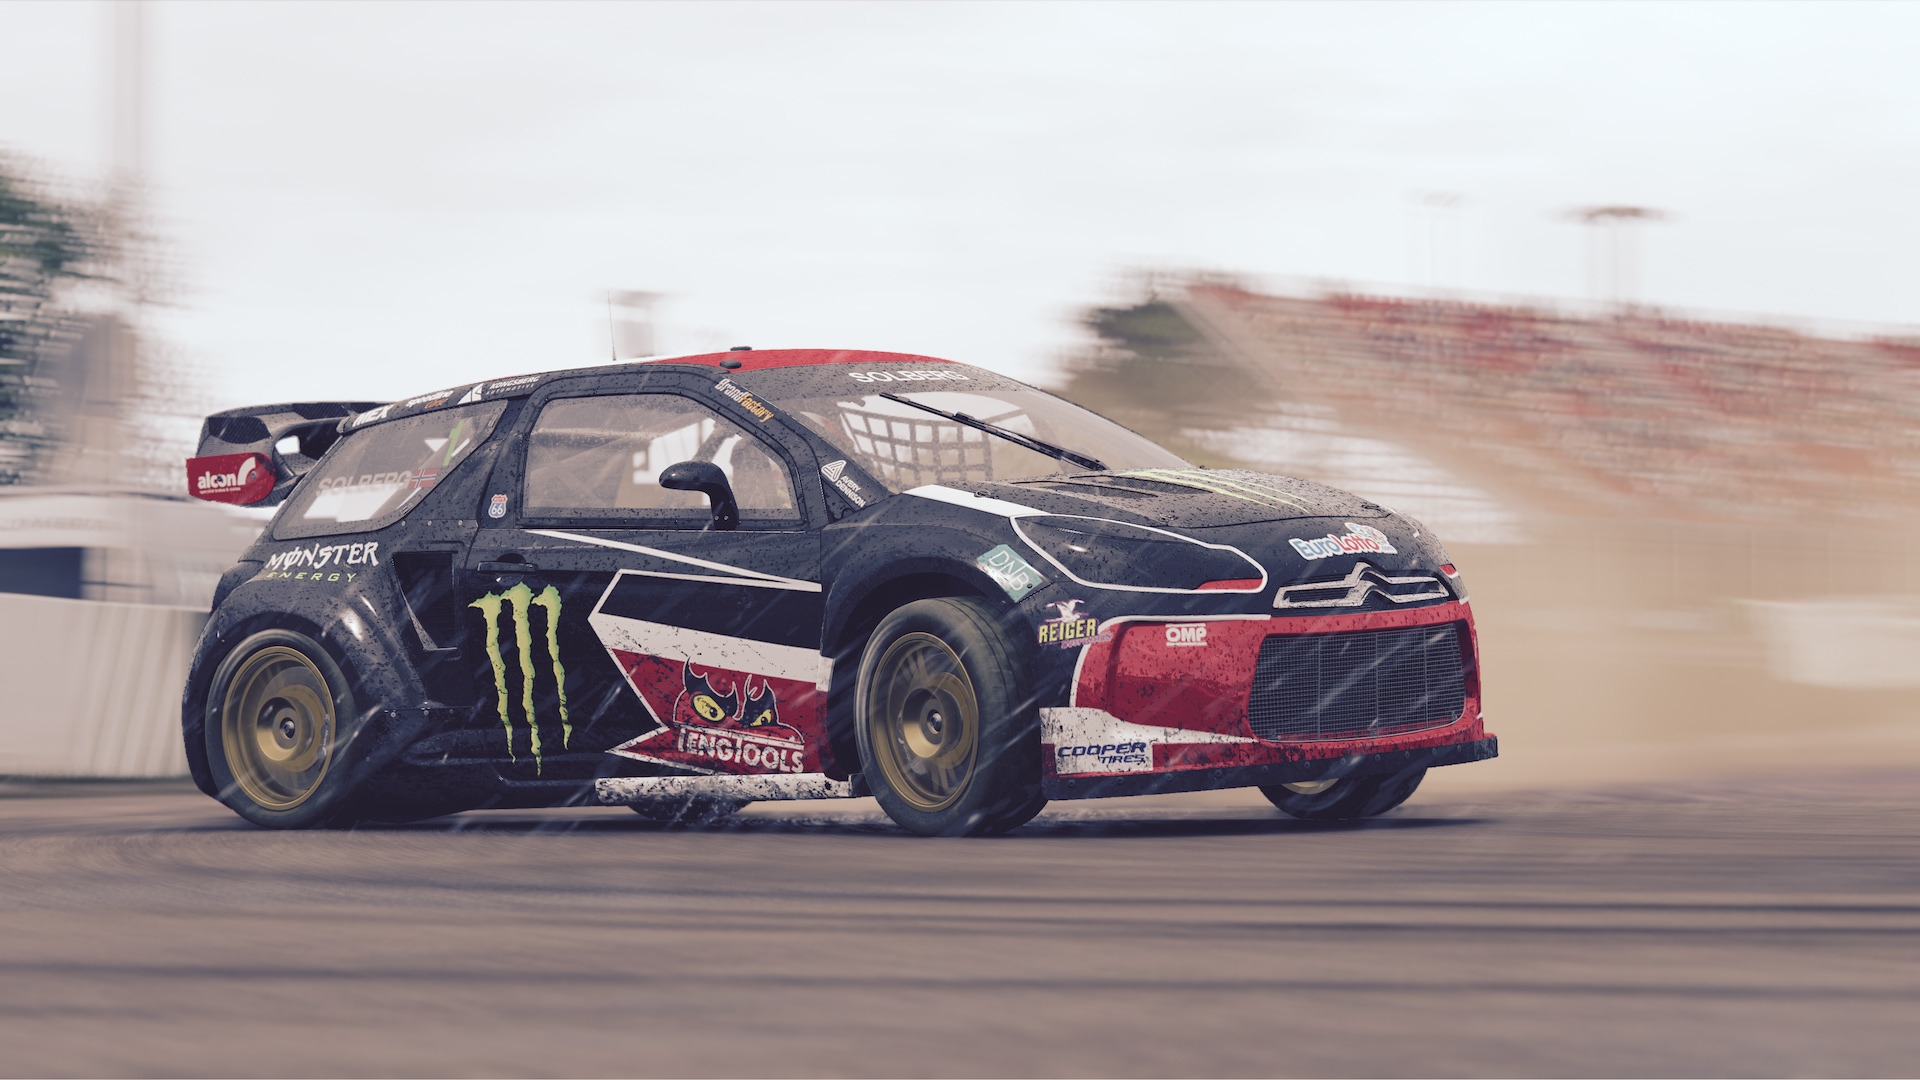 Project Cars 2 Fun Pack expansion